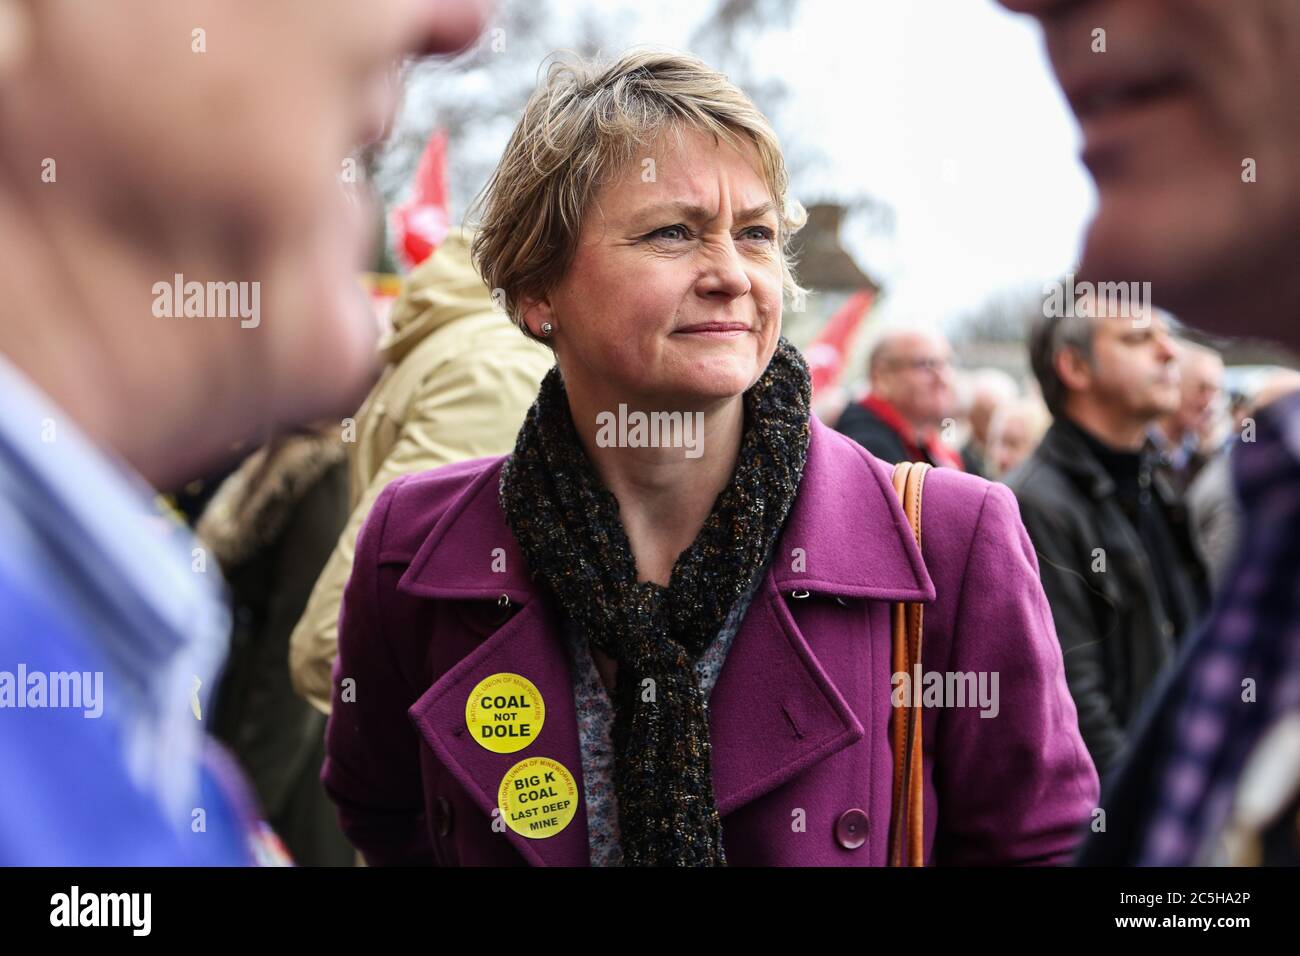 Yvette Cooper, Labour MP for Normanton, Pontefract and Castleford, in Knottingley, West Yorkshire, for a march to mark the closure of the nearby Kelli Stock Photo